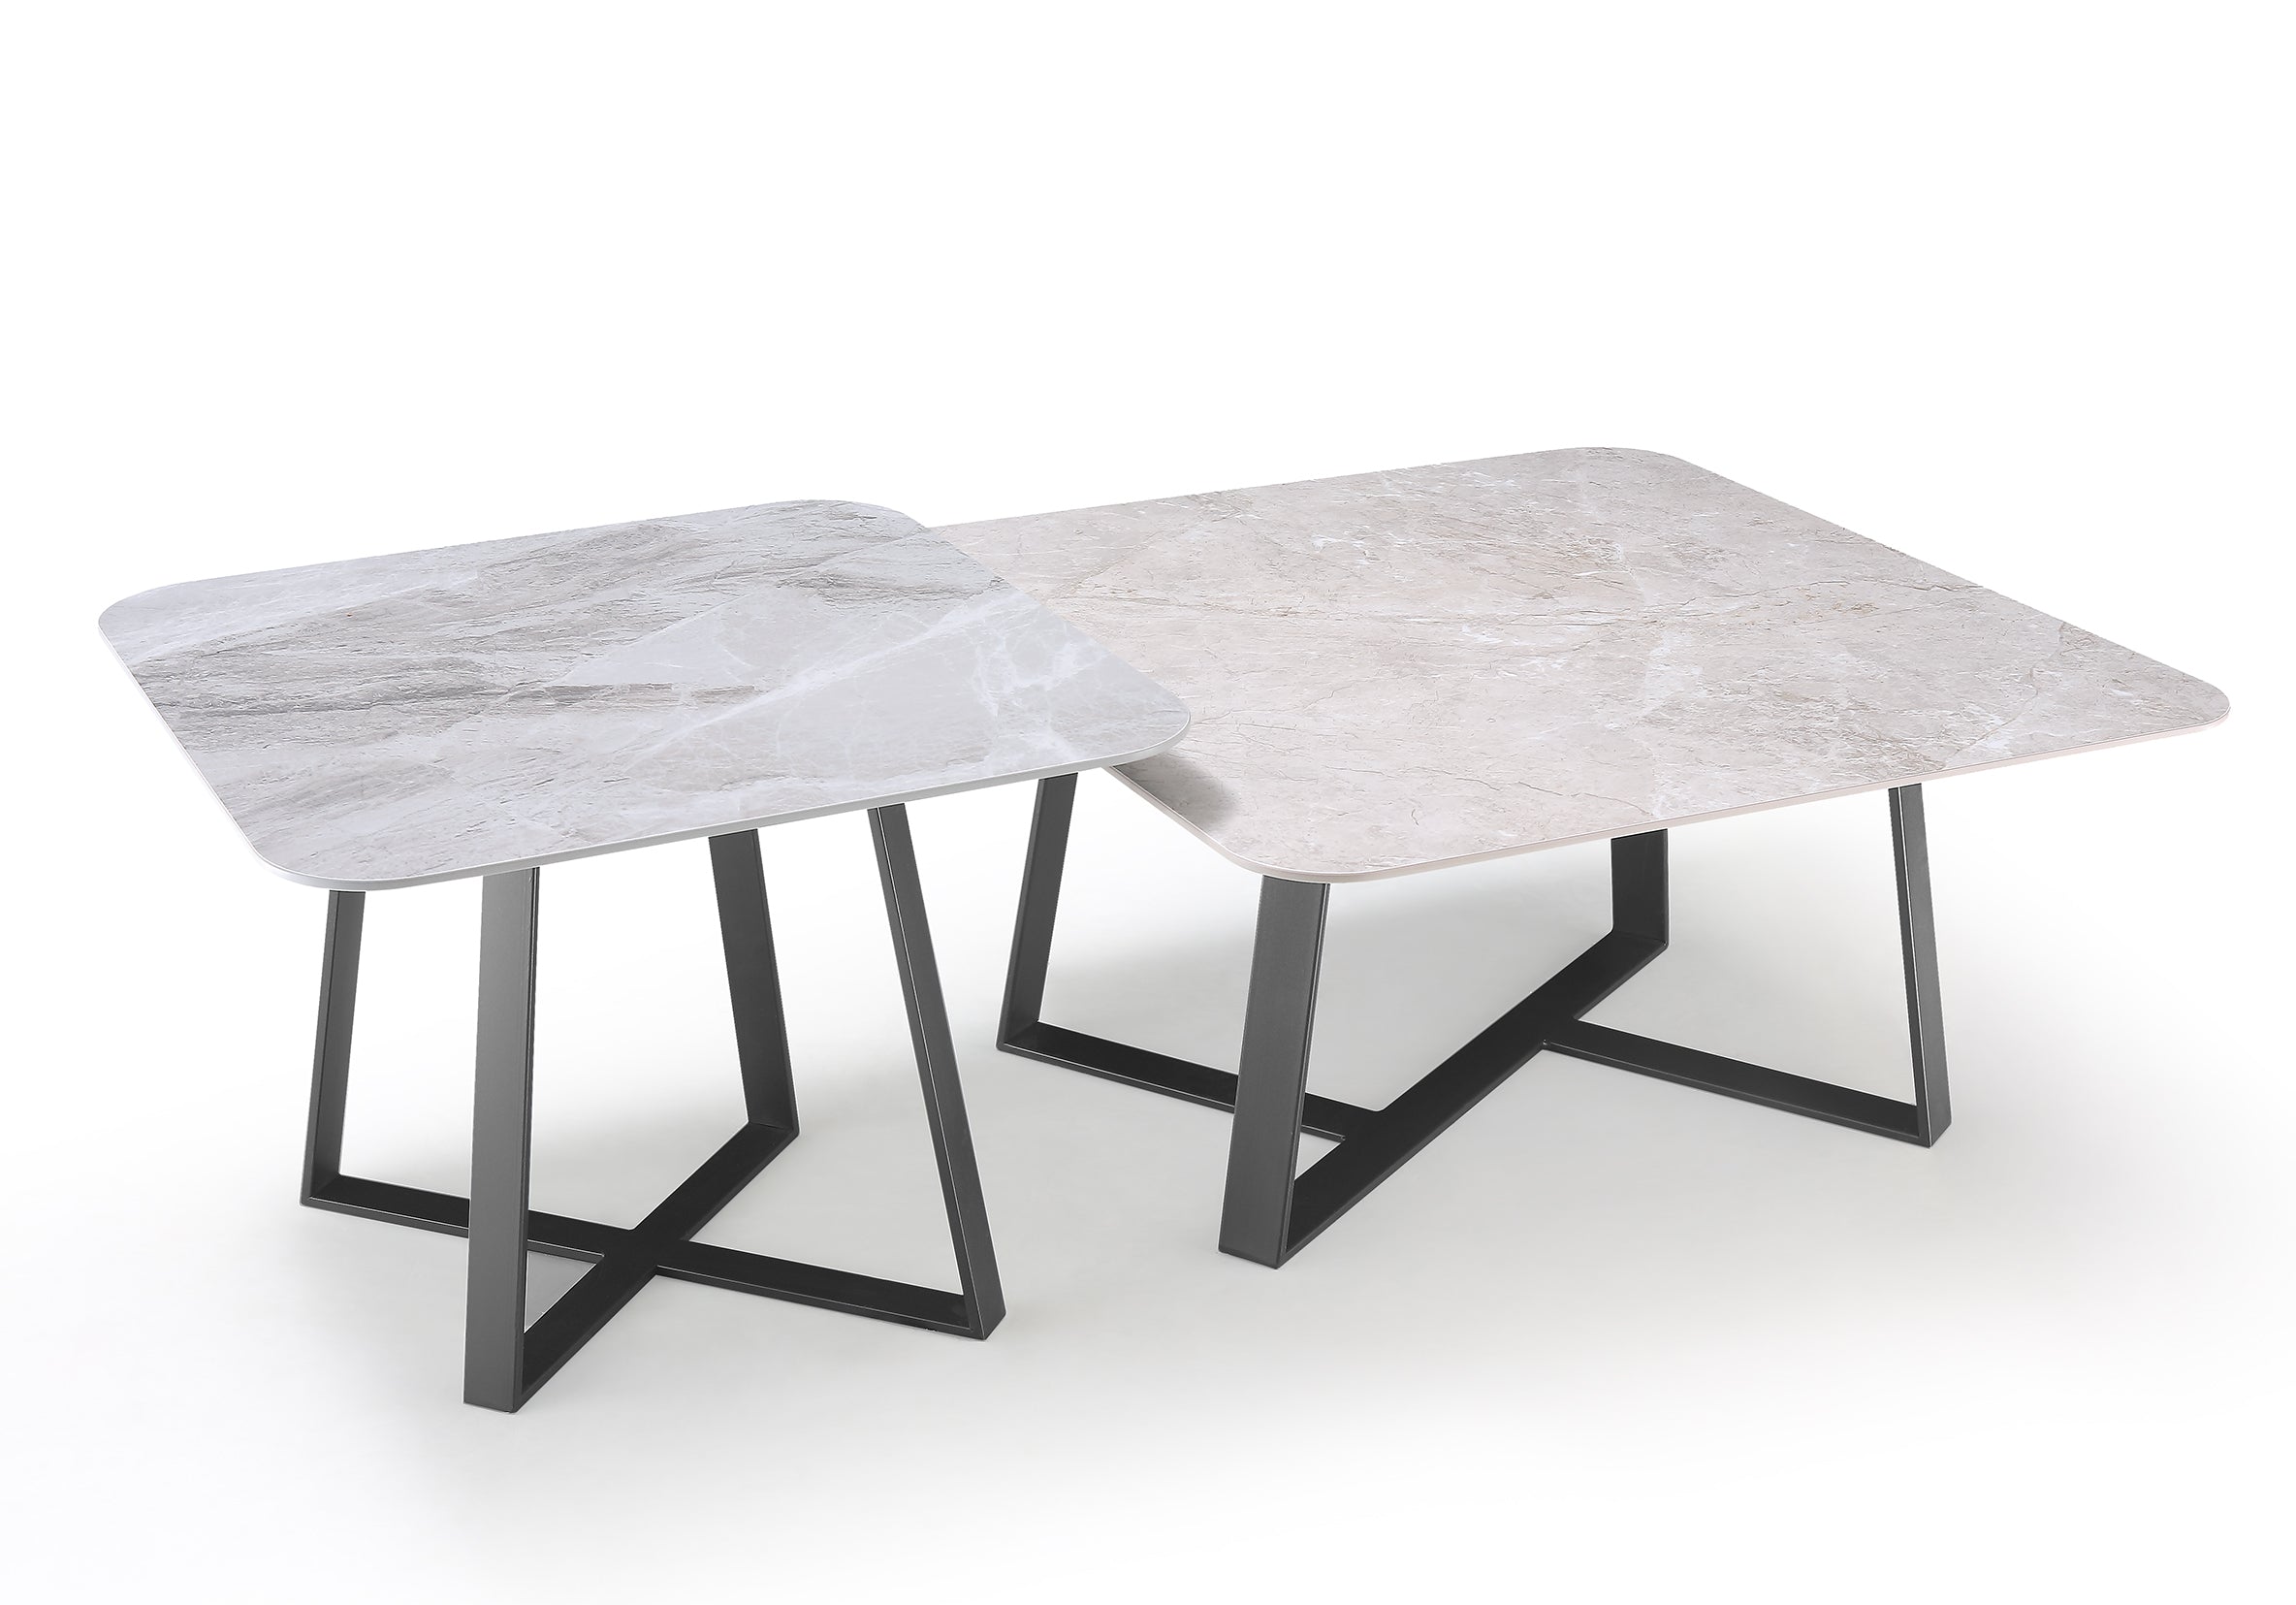 Brody Center Table With Marble Top And Iron + Metal Base - White + Grey